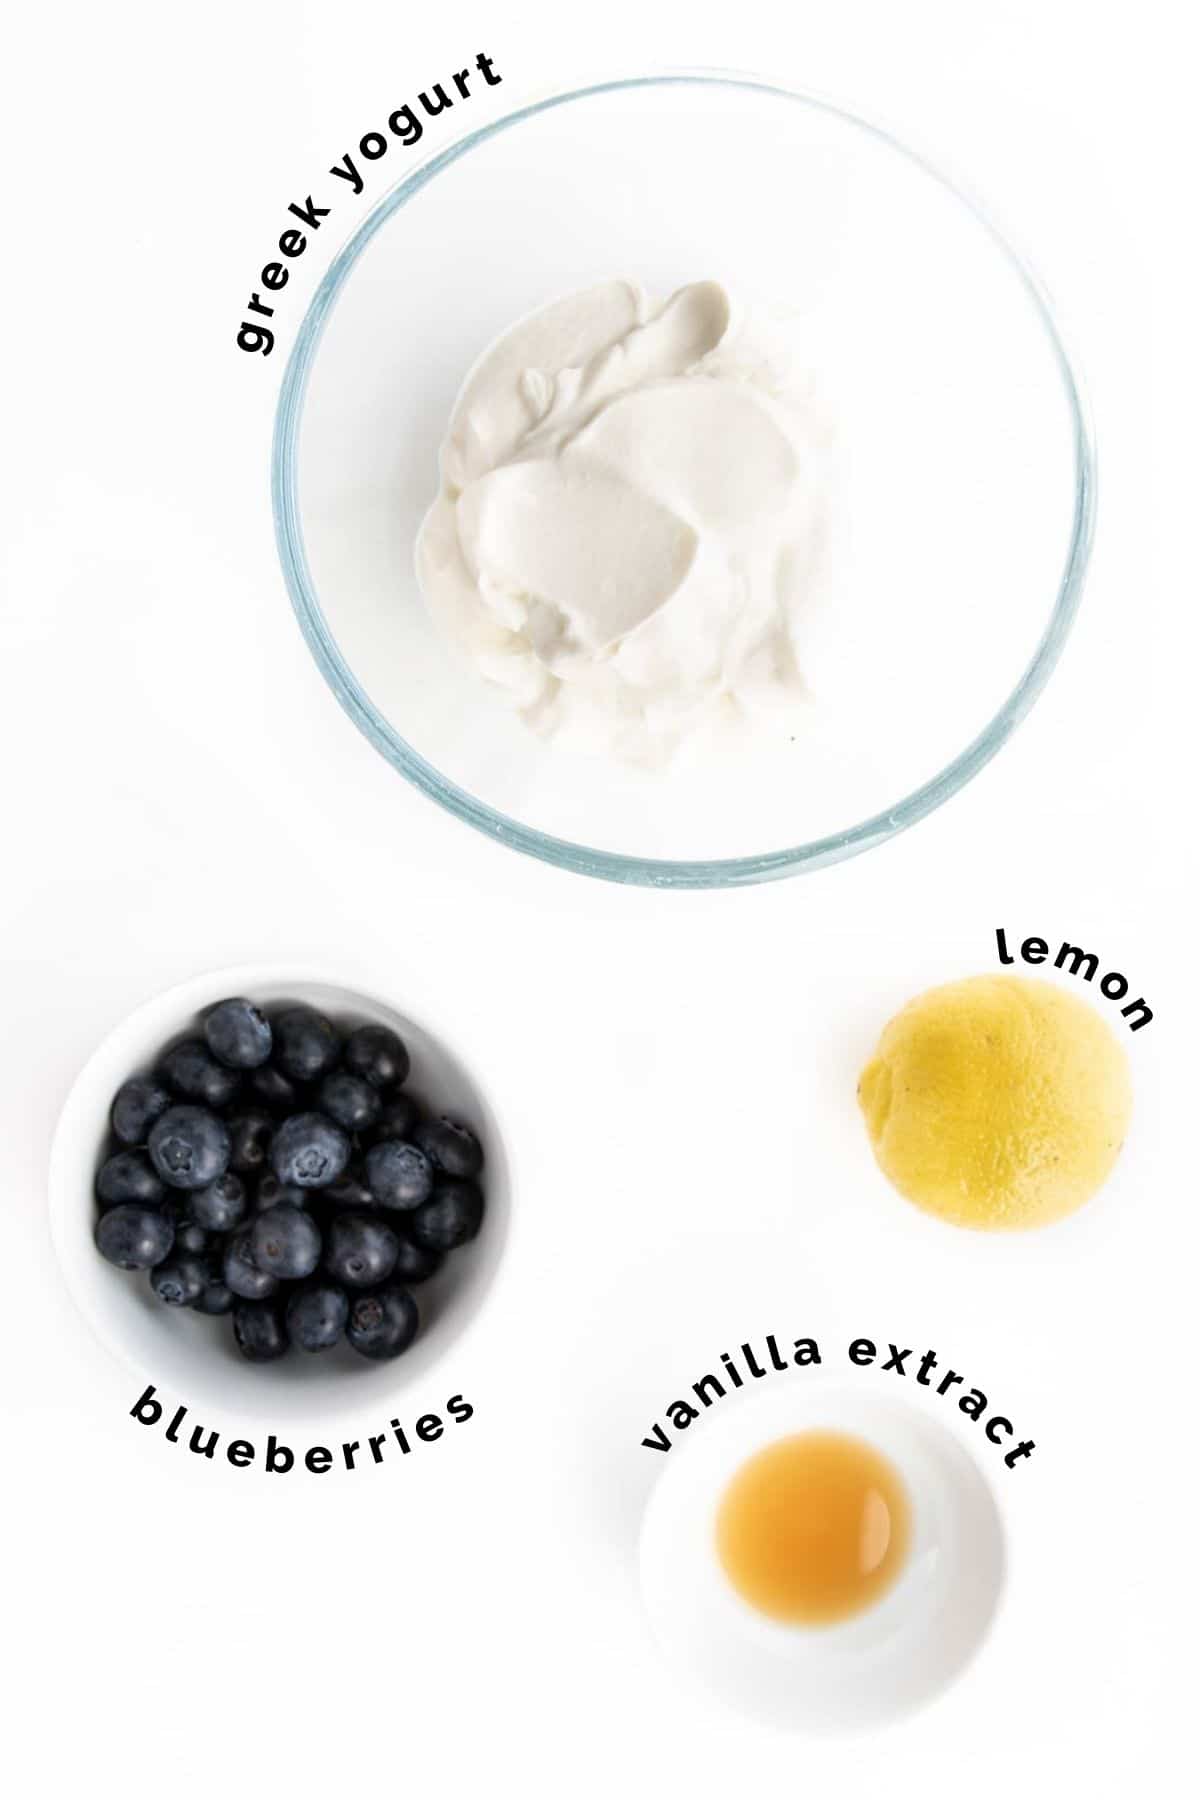 Flat Lay of Ingredients Needed to Make Blueberry Yogurt (Labelled)